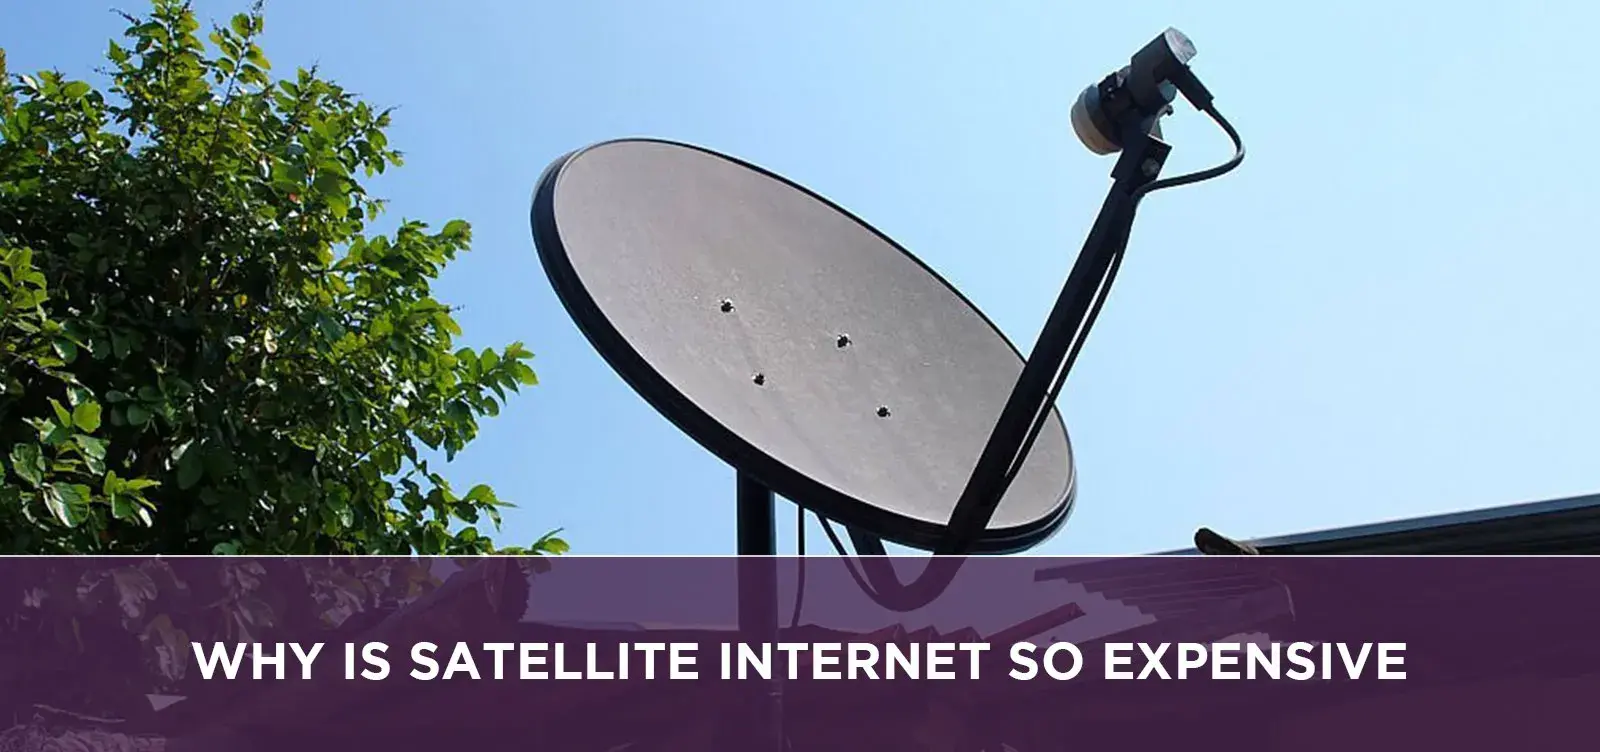 Why Is Satellite Internet So Expensive?